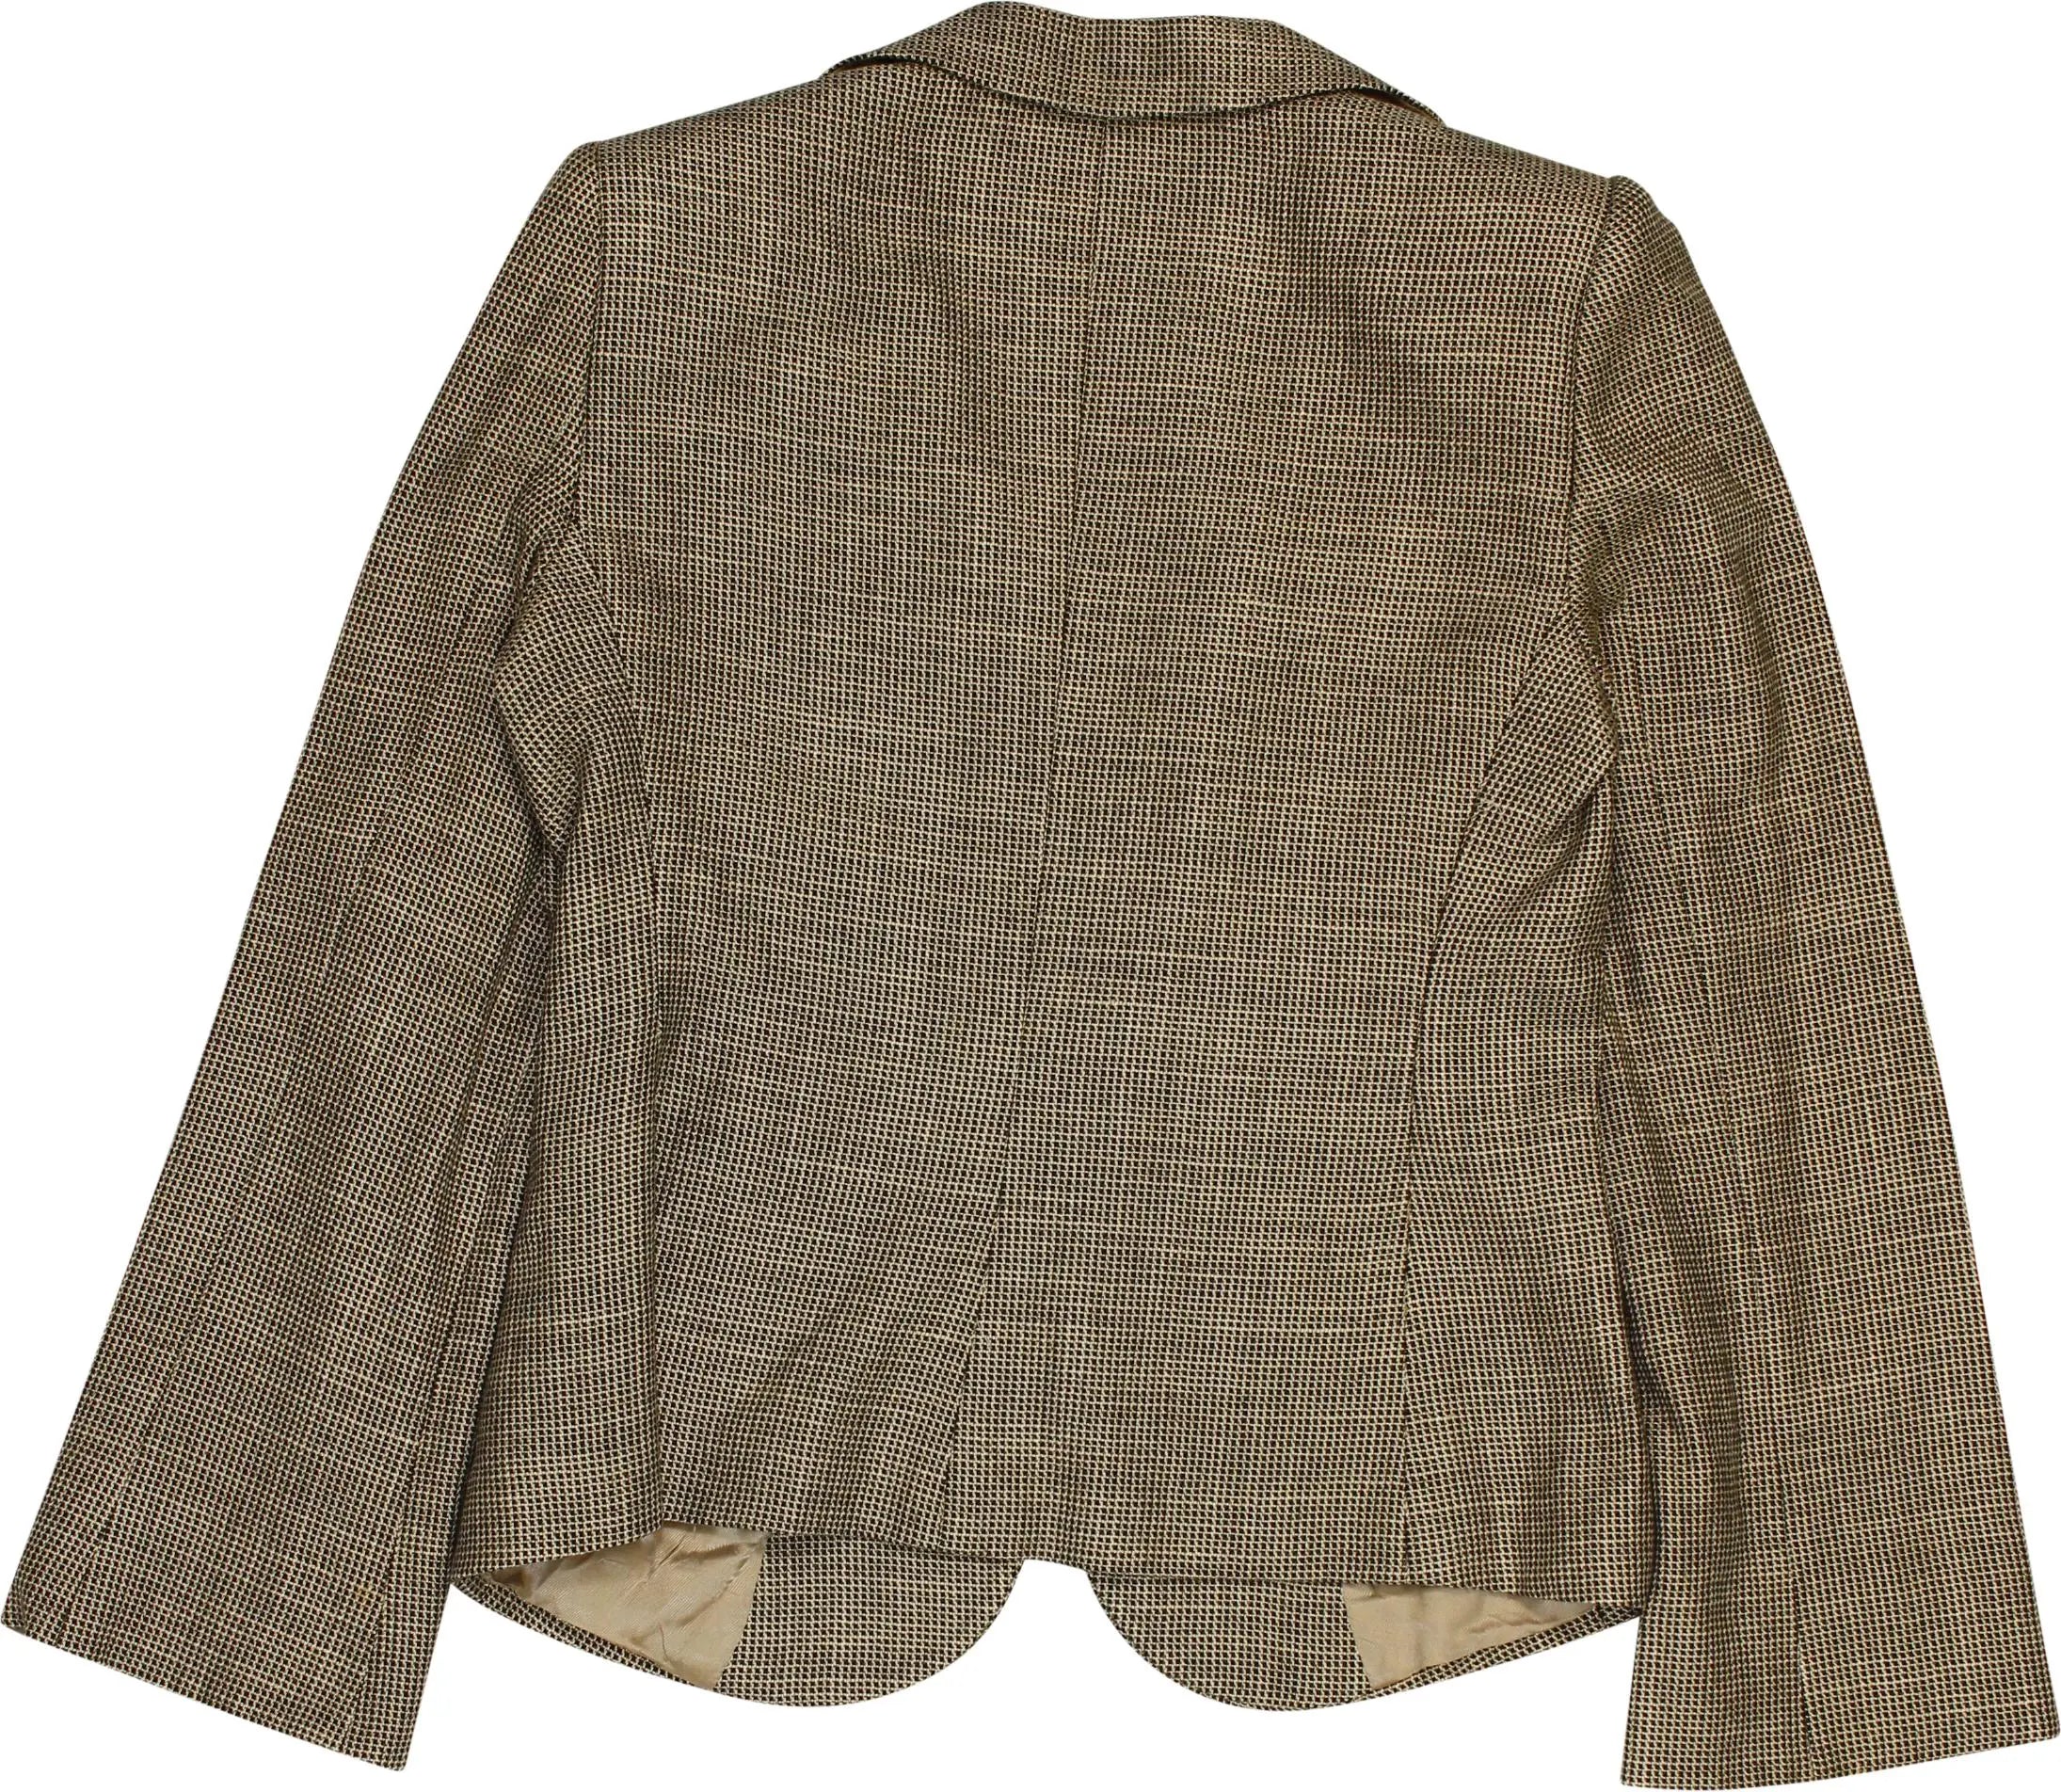 Armani Collezioni - Blazer by Armani- ThriftTale.com - Vintage and second handclothing